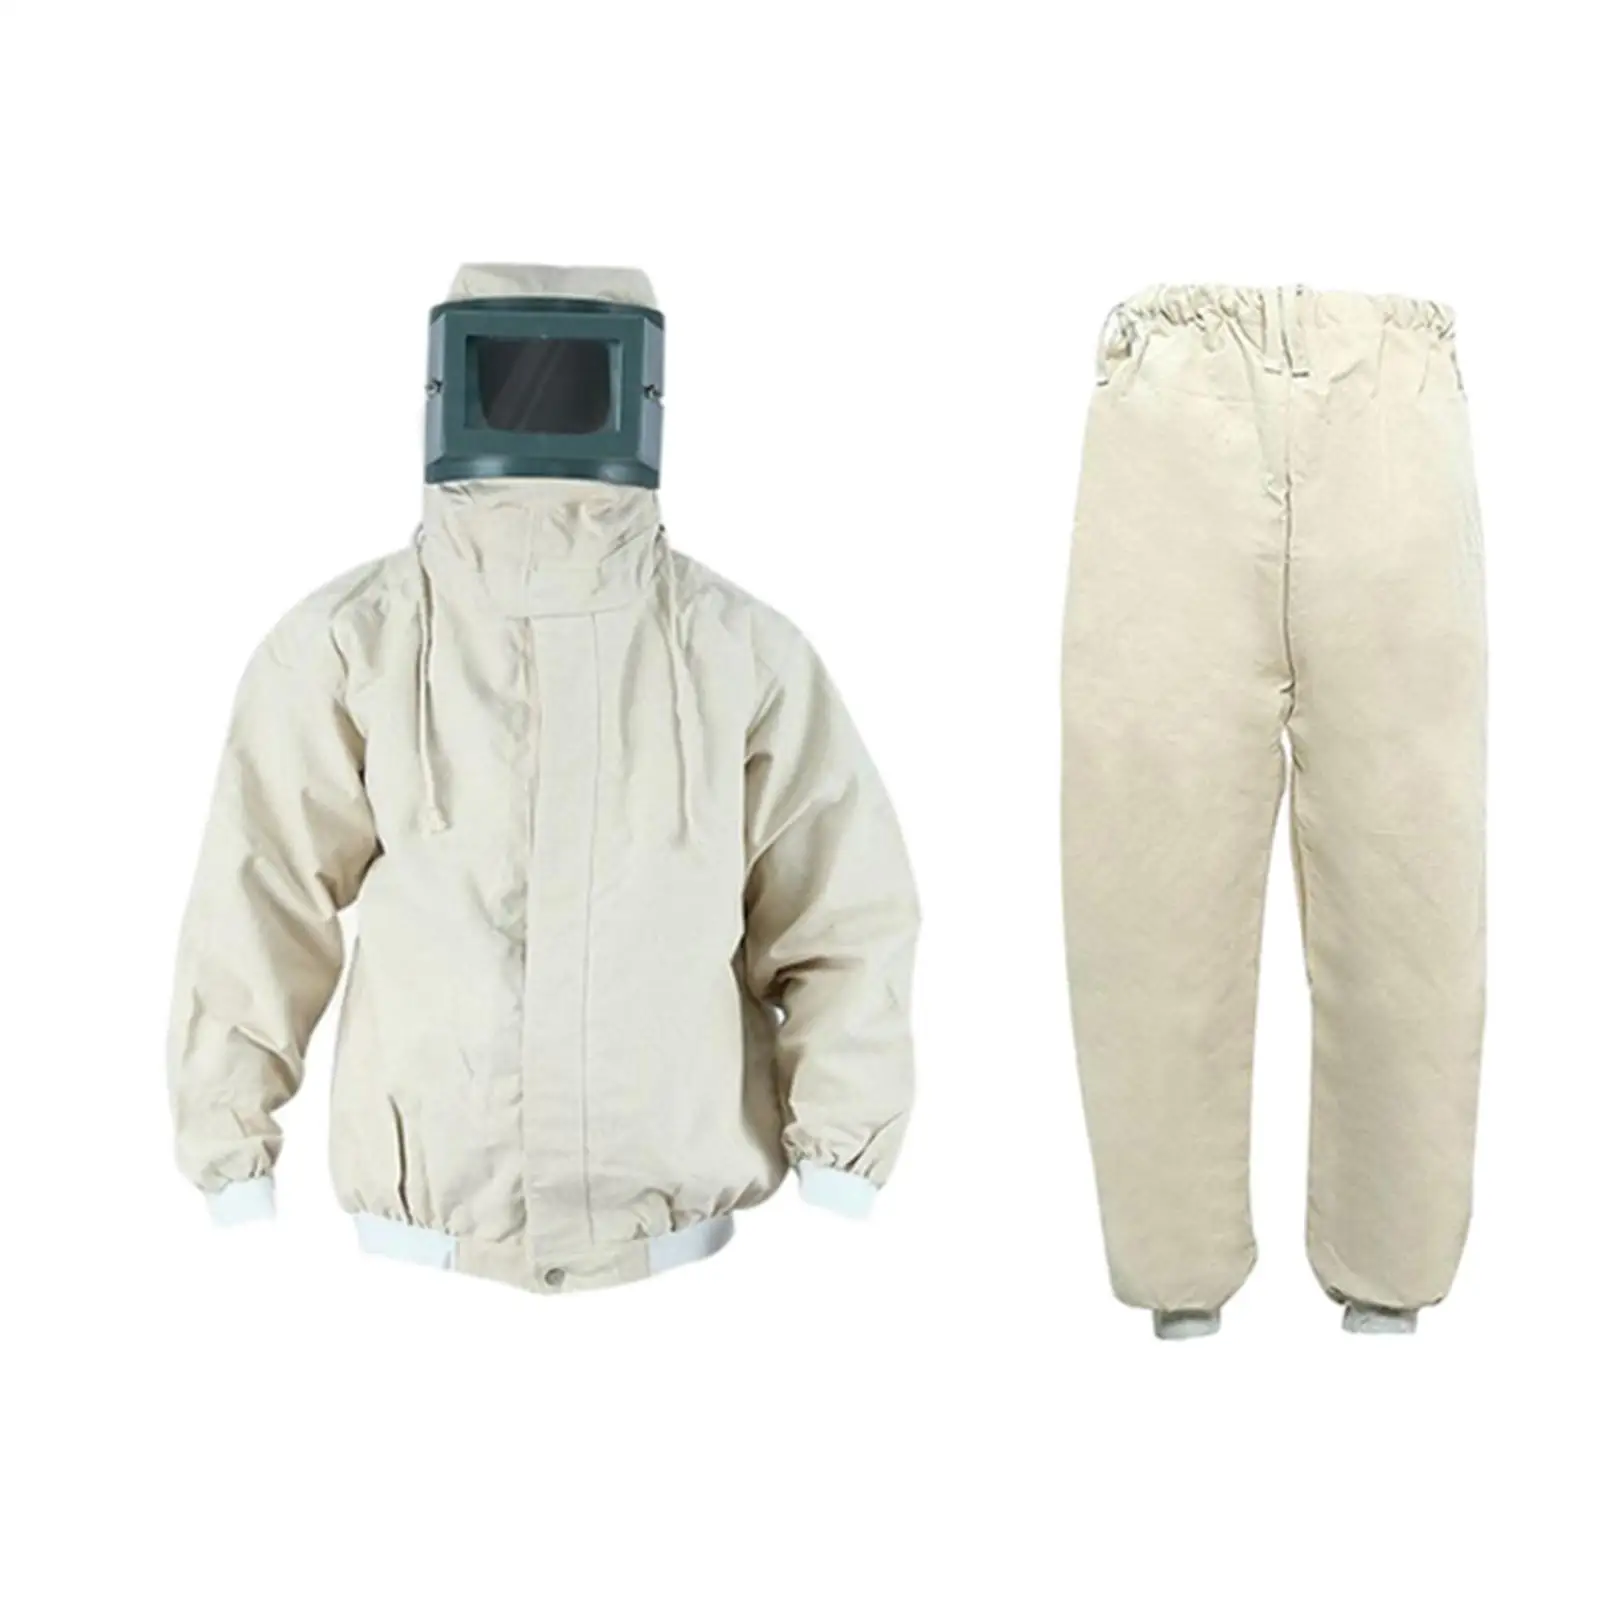 Extra Large Protective Coveralls Spray Paint Protective Clothes Professional Sandblasting Clothing for Shipbuilding Woodworking